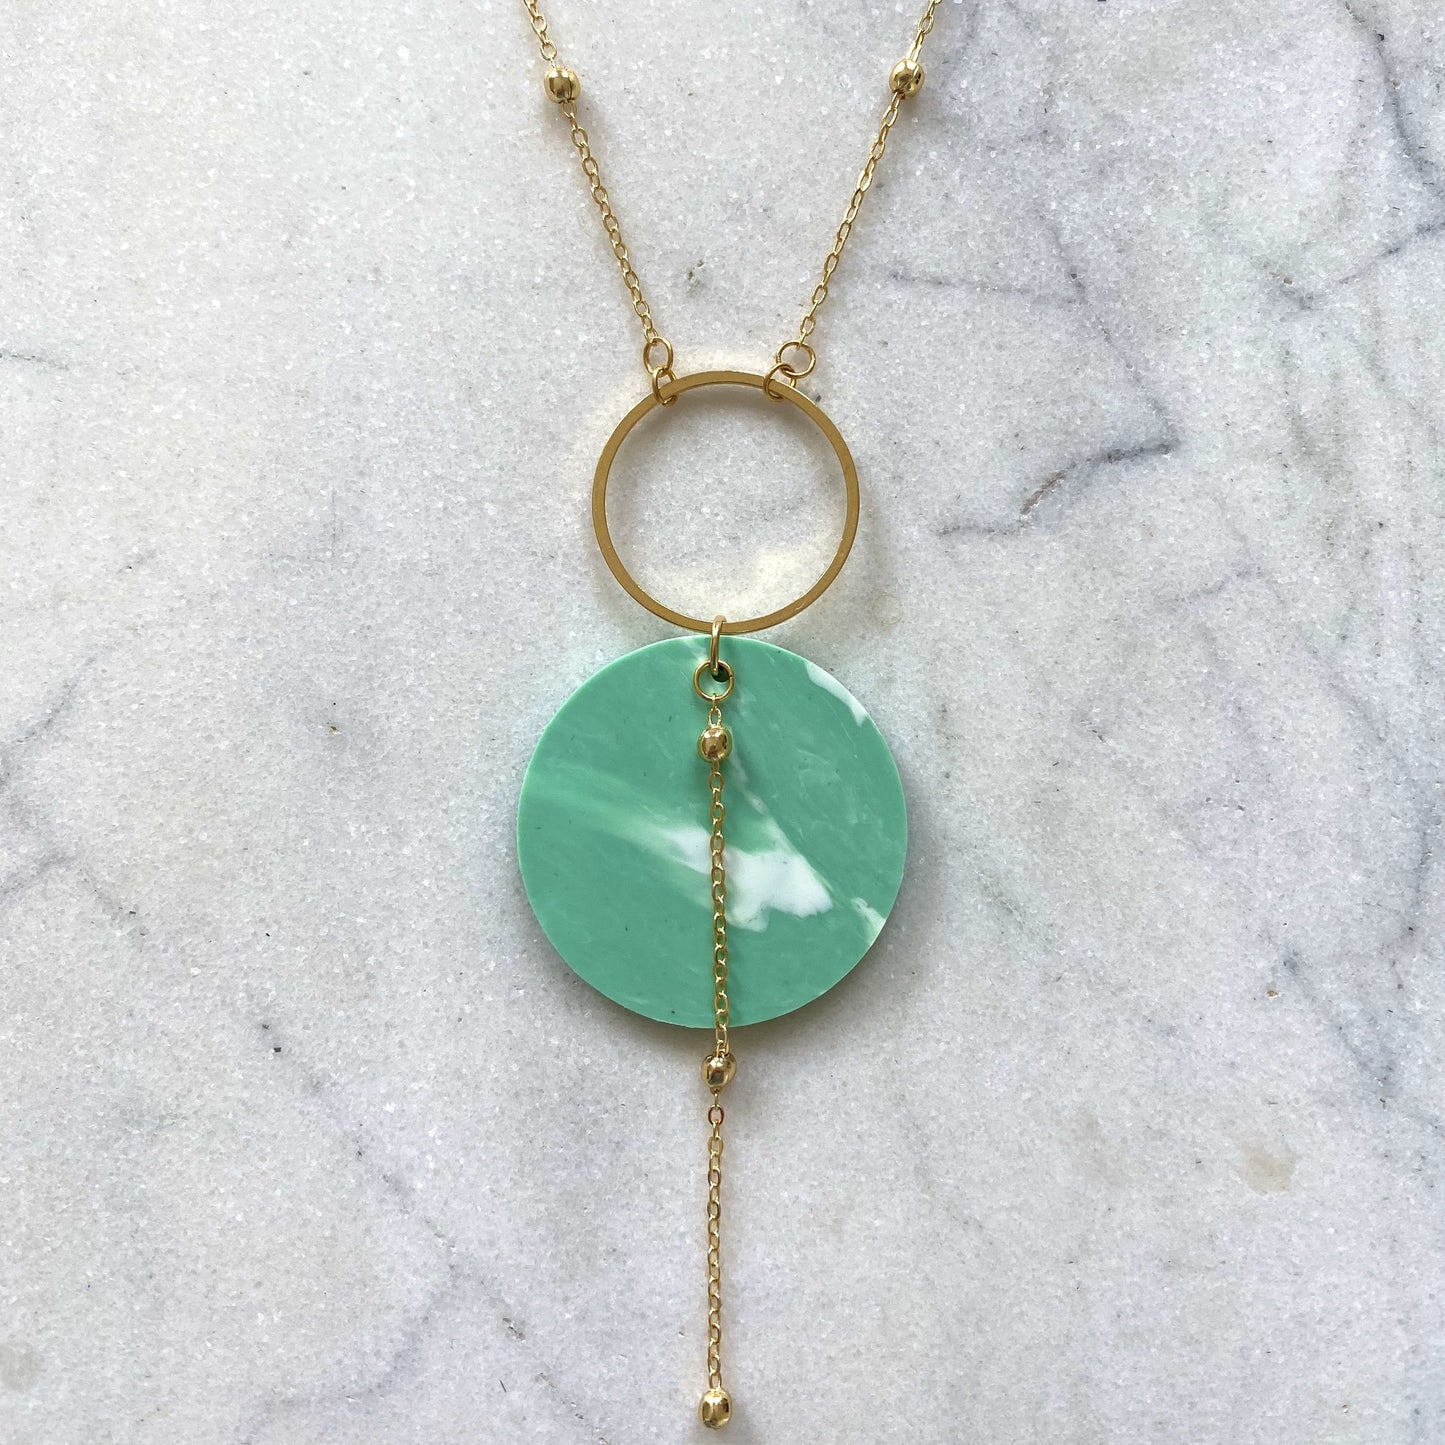 Celestial Necklace- Jade Green Marble